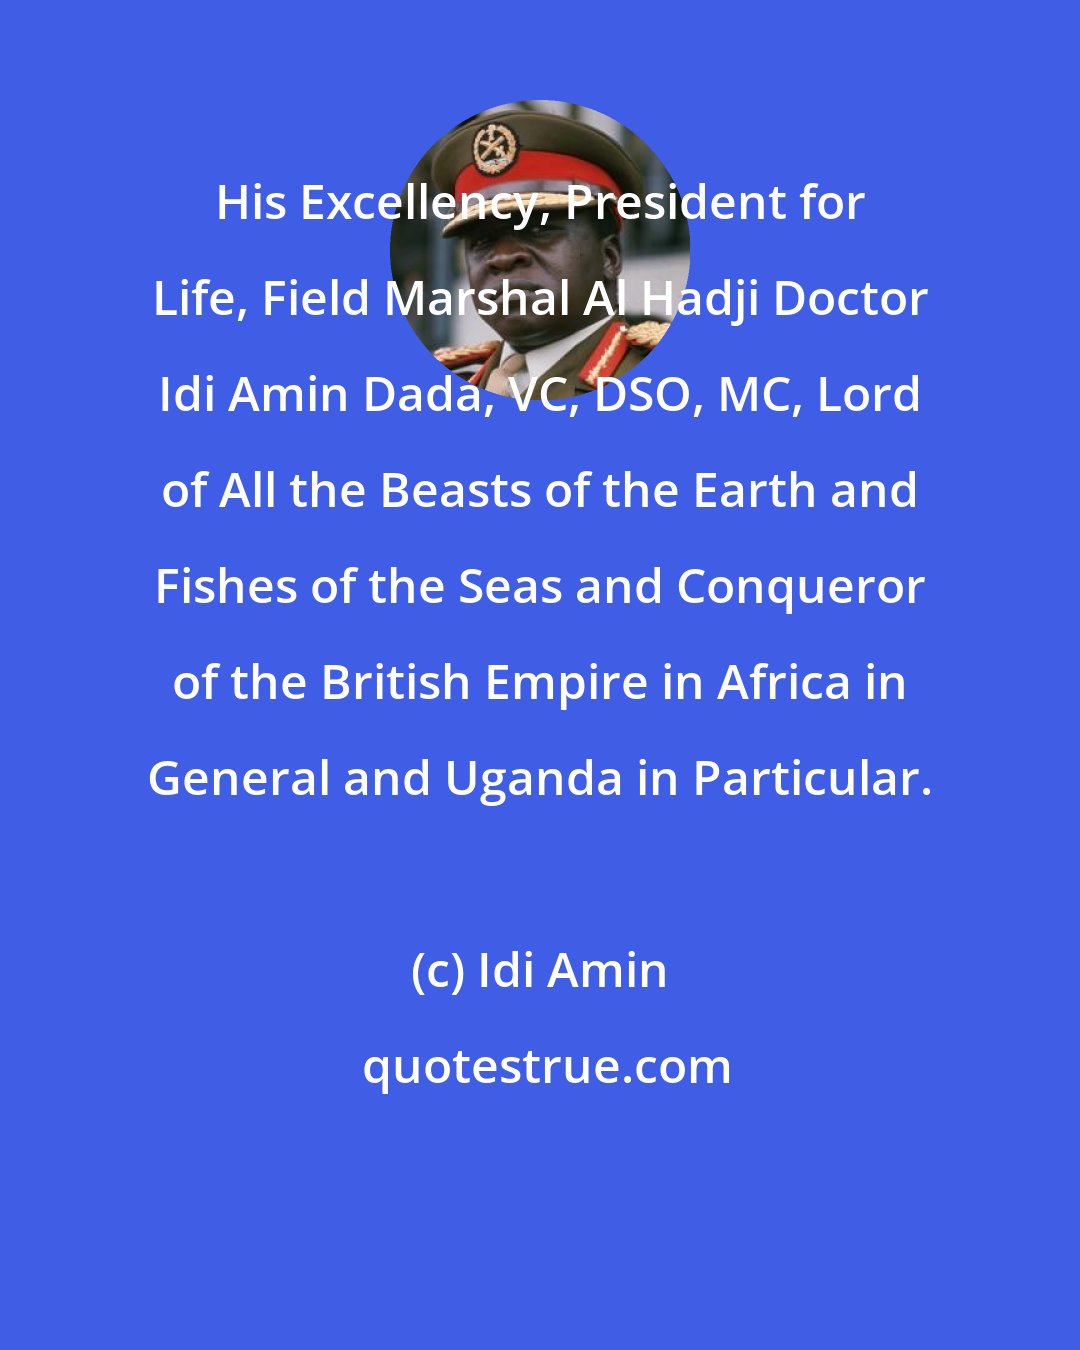 Idi Amin: His Excellency, President for Life, Field Marshal Al Hadji Doctor Idi Amin Dada, VC, DSO, MC, Lord of All the Beasts of the Earth and Fishes of the Seas and Conqueror of the British Empire in Africa in General and Uganda in Particular.